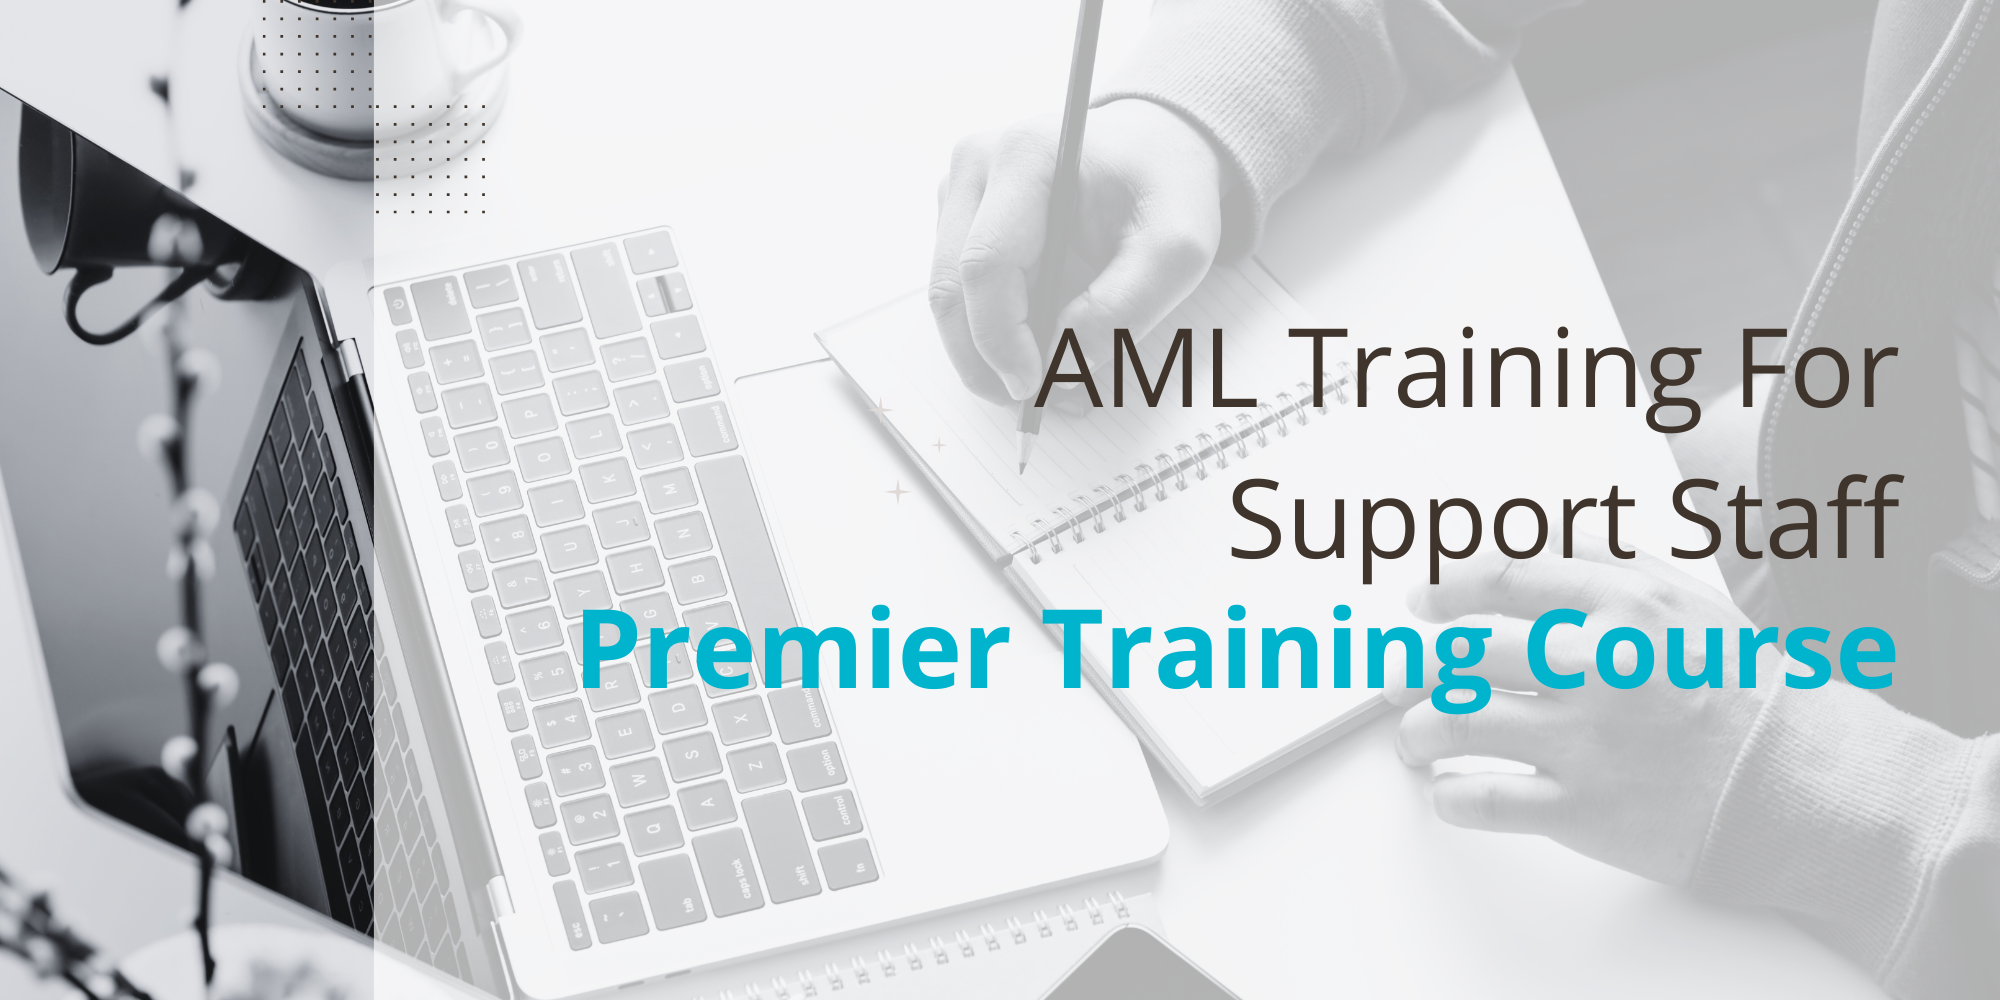 Anti-Money Laundering (AML) Training For Support Staff Course